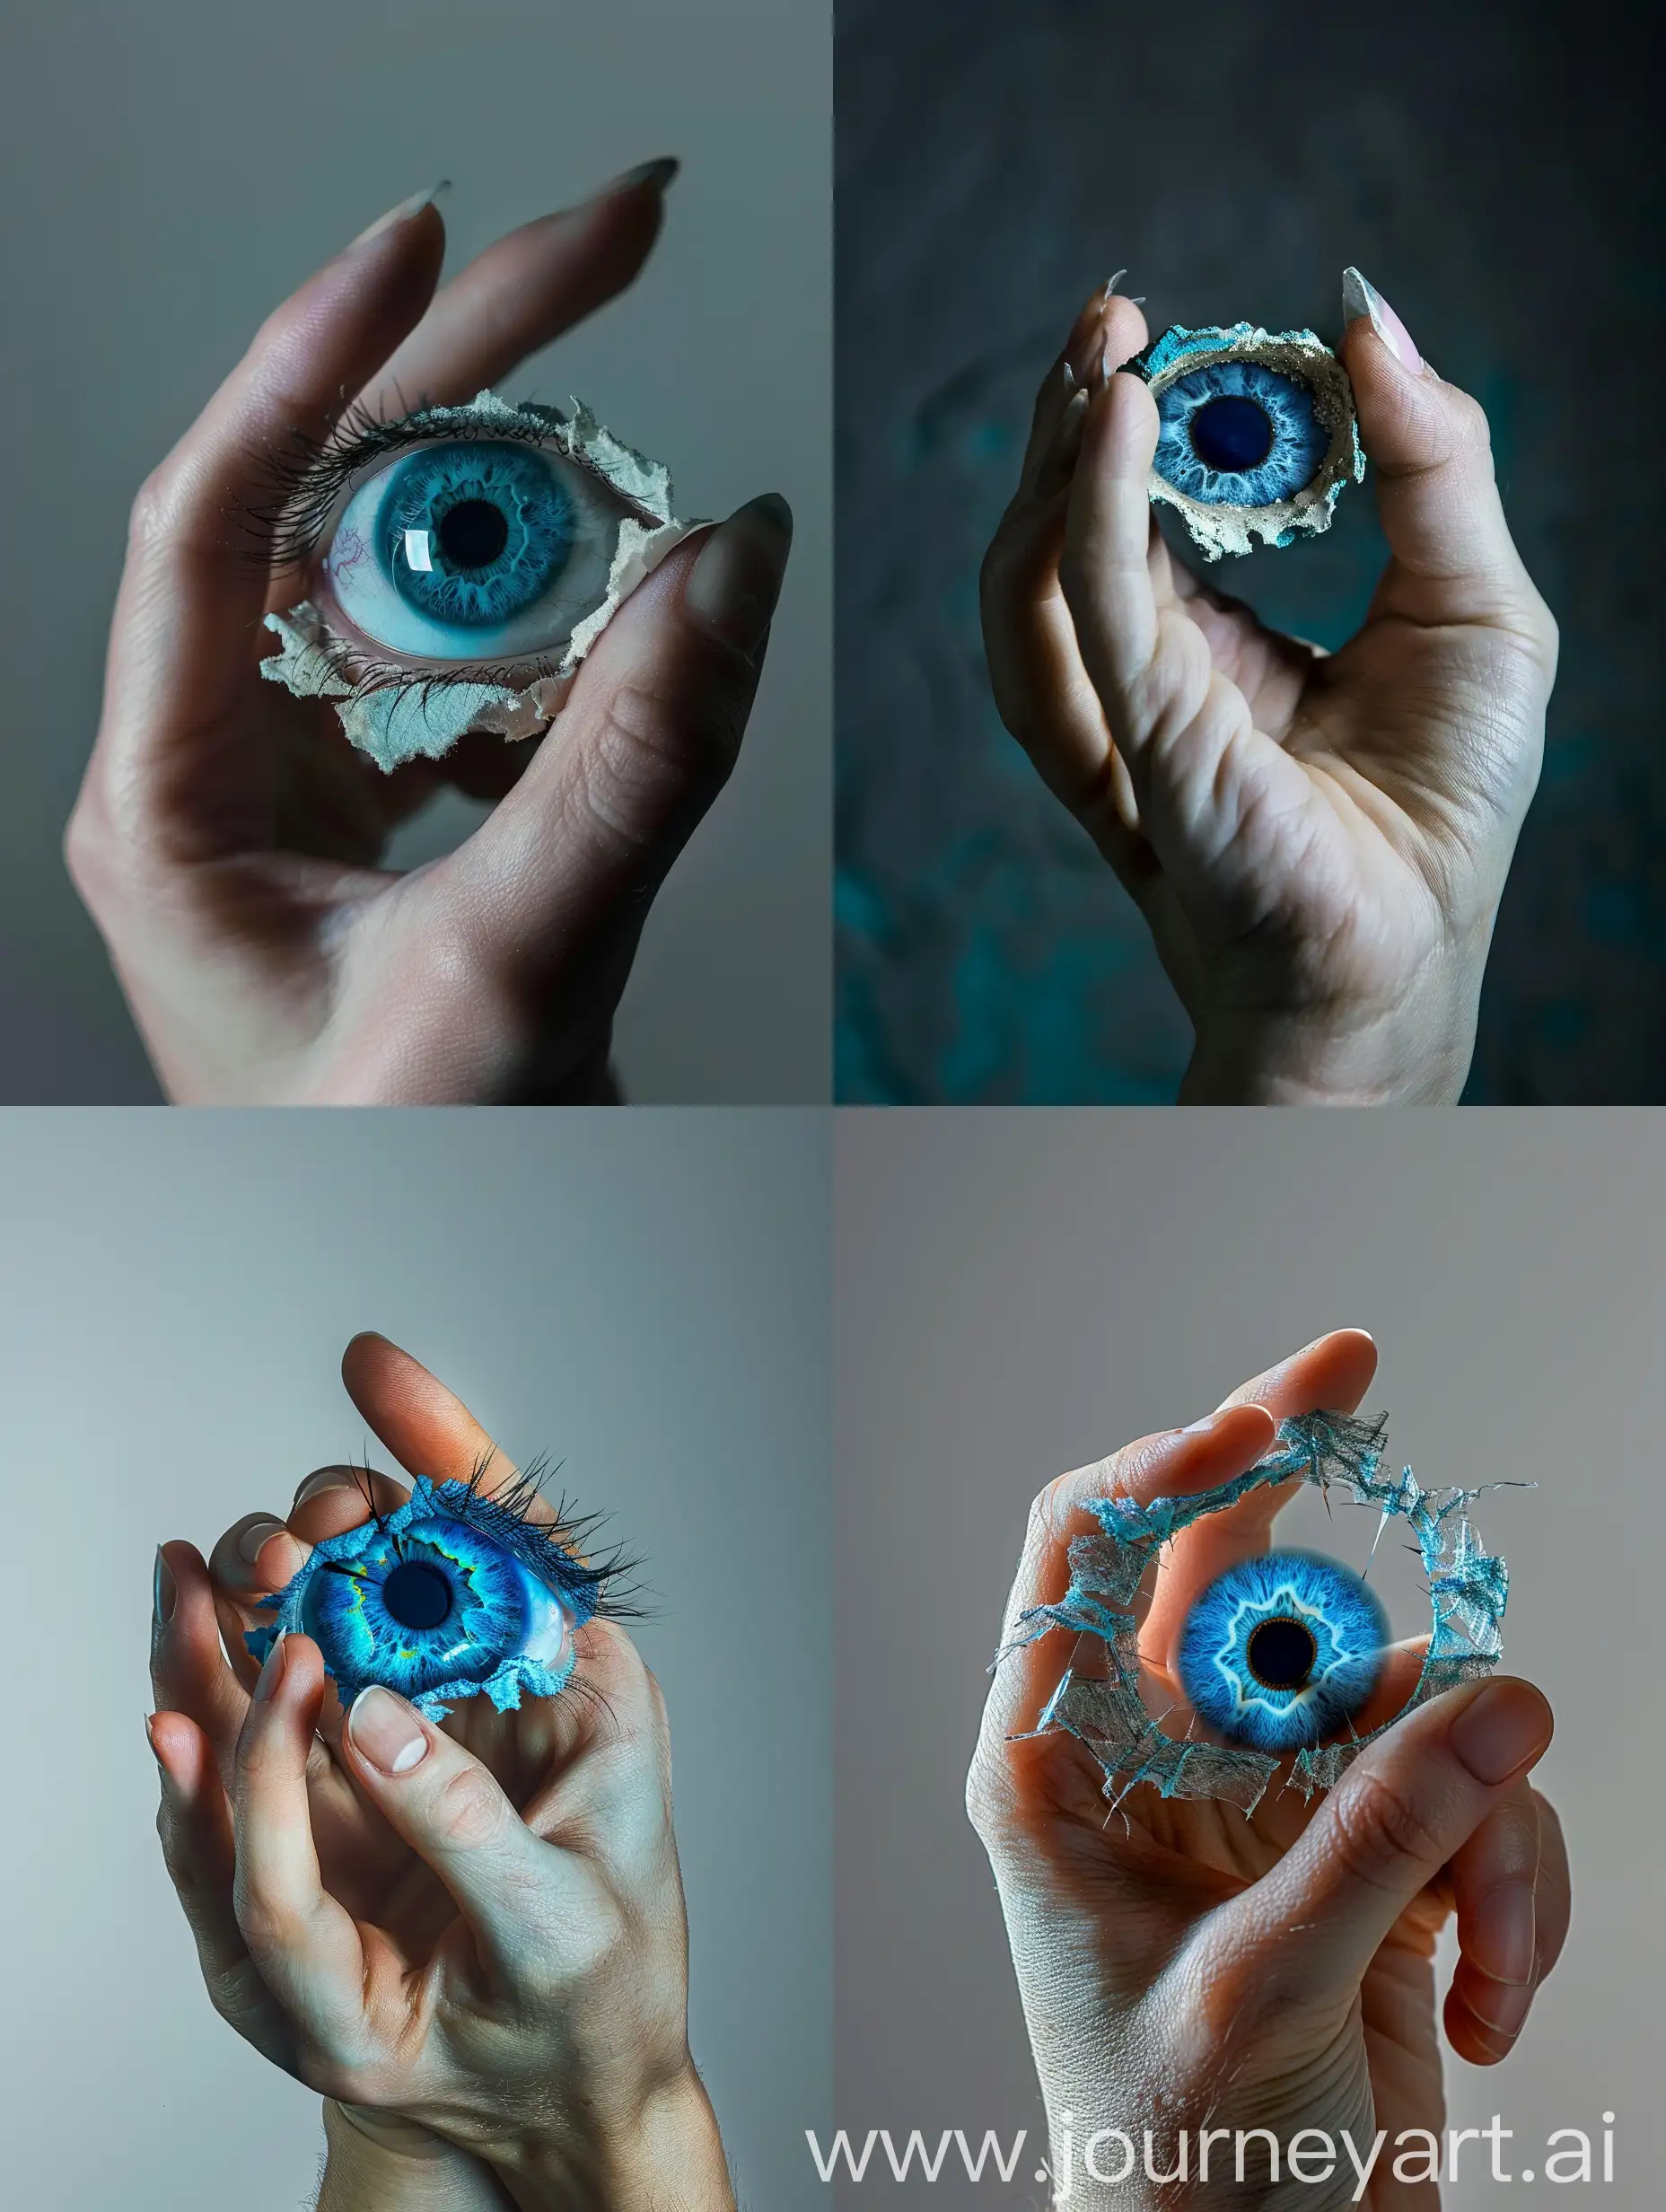 Surreal-Art-Hand-Holding-Tornout-Blue-Eye